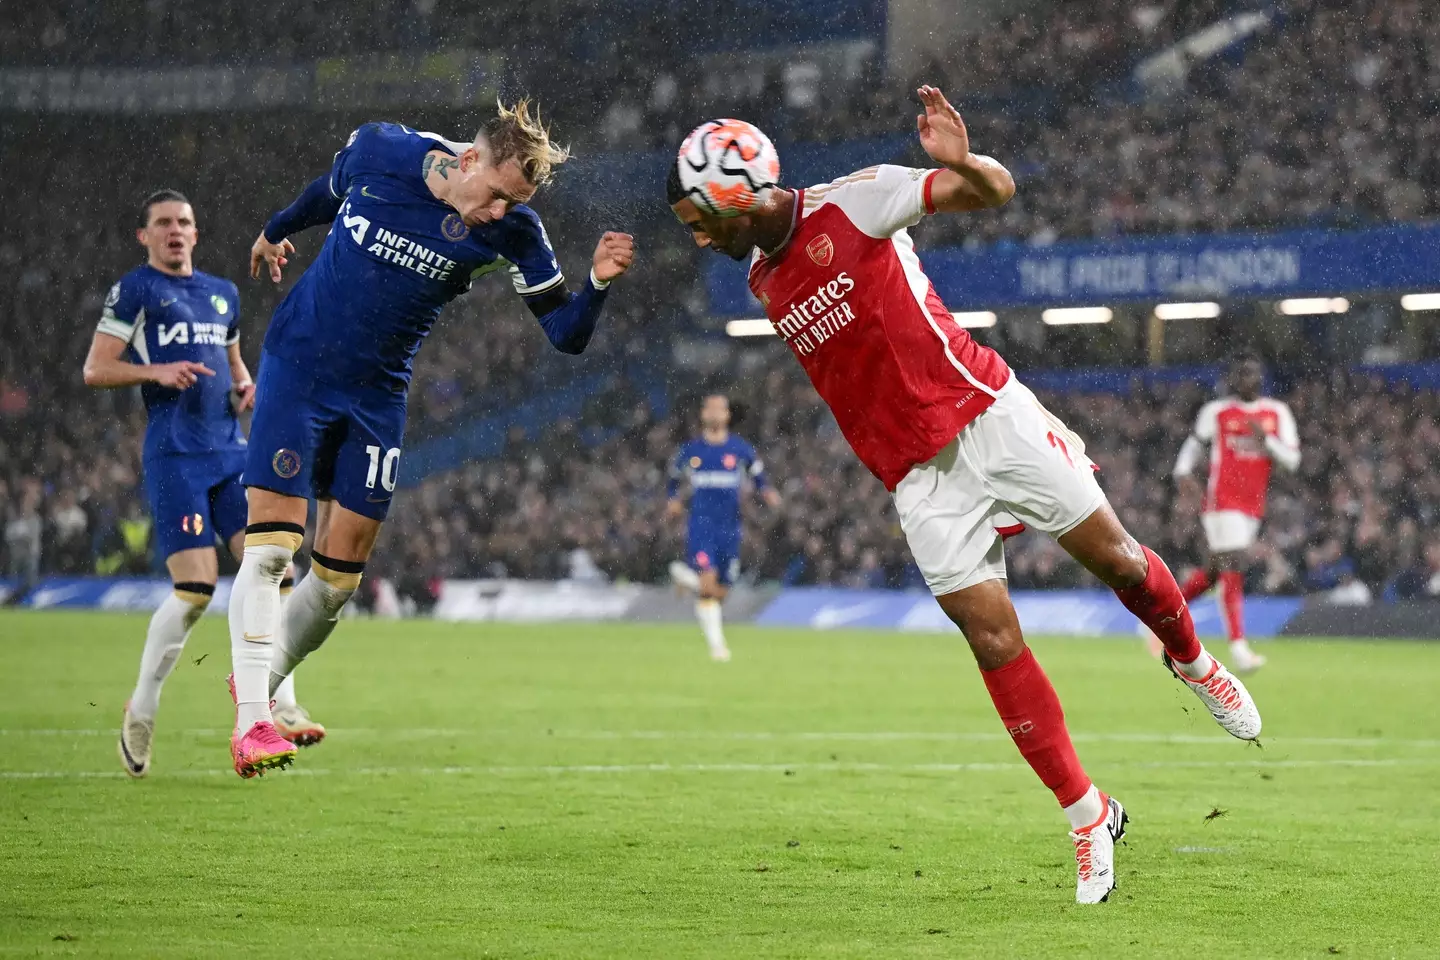 John Terry believes the penalty decision against William Saliba was 'harsh'.